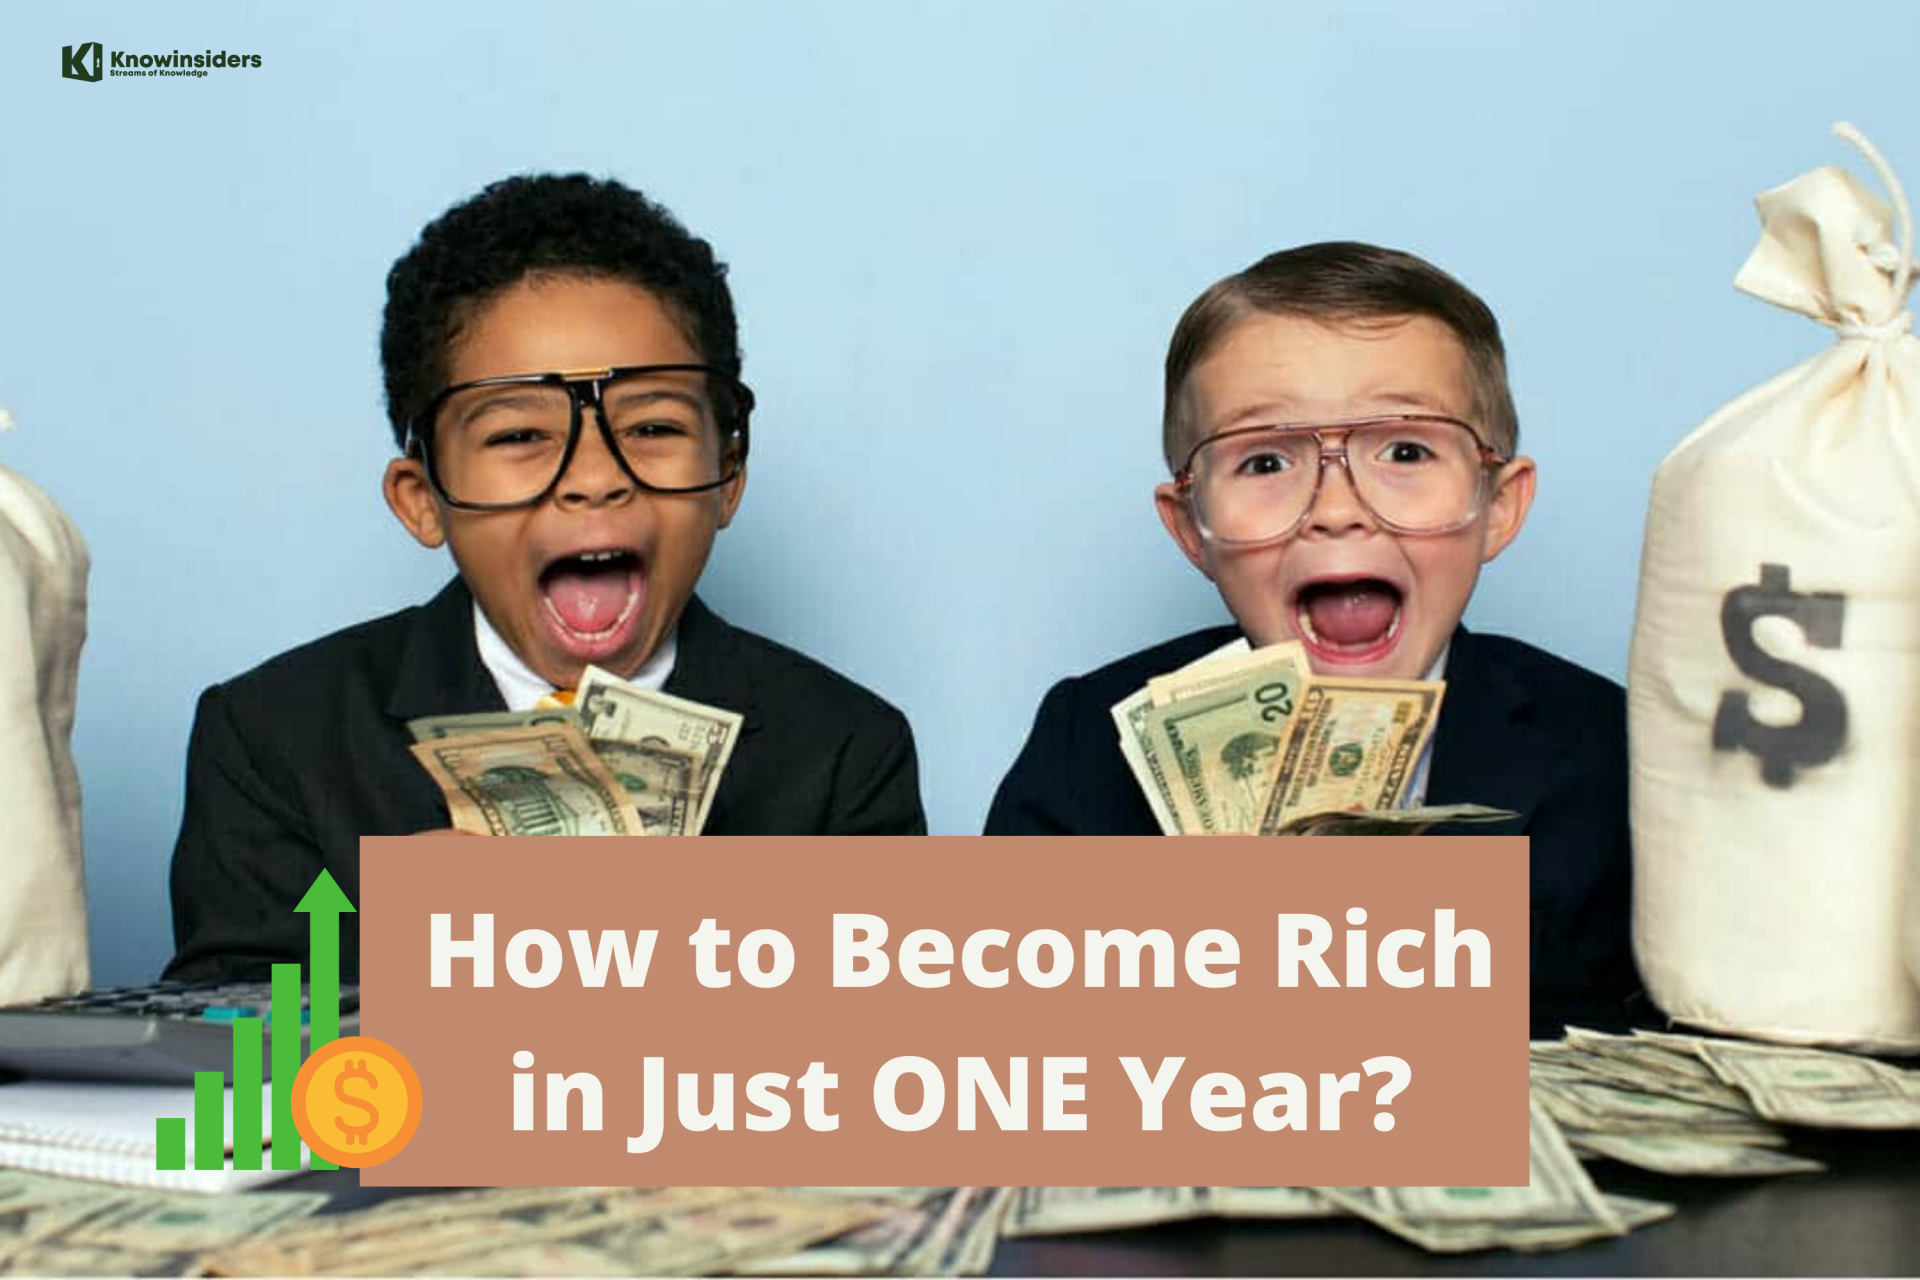 How to Become Rich in One Year?